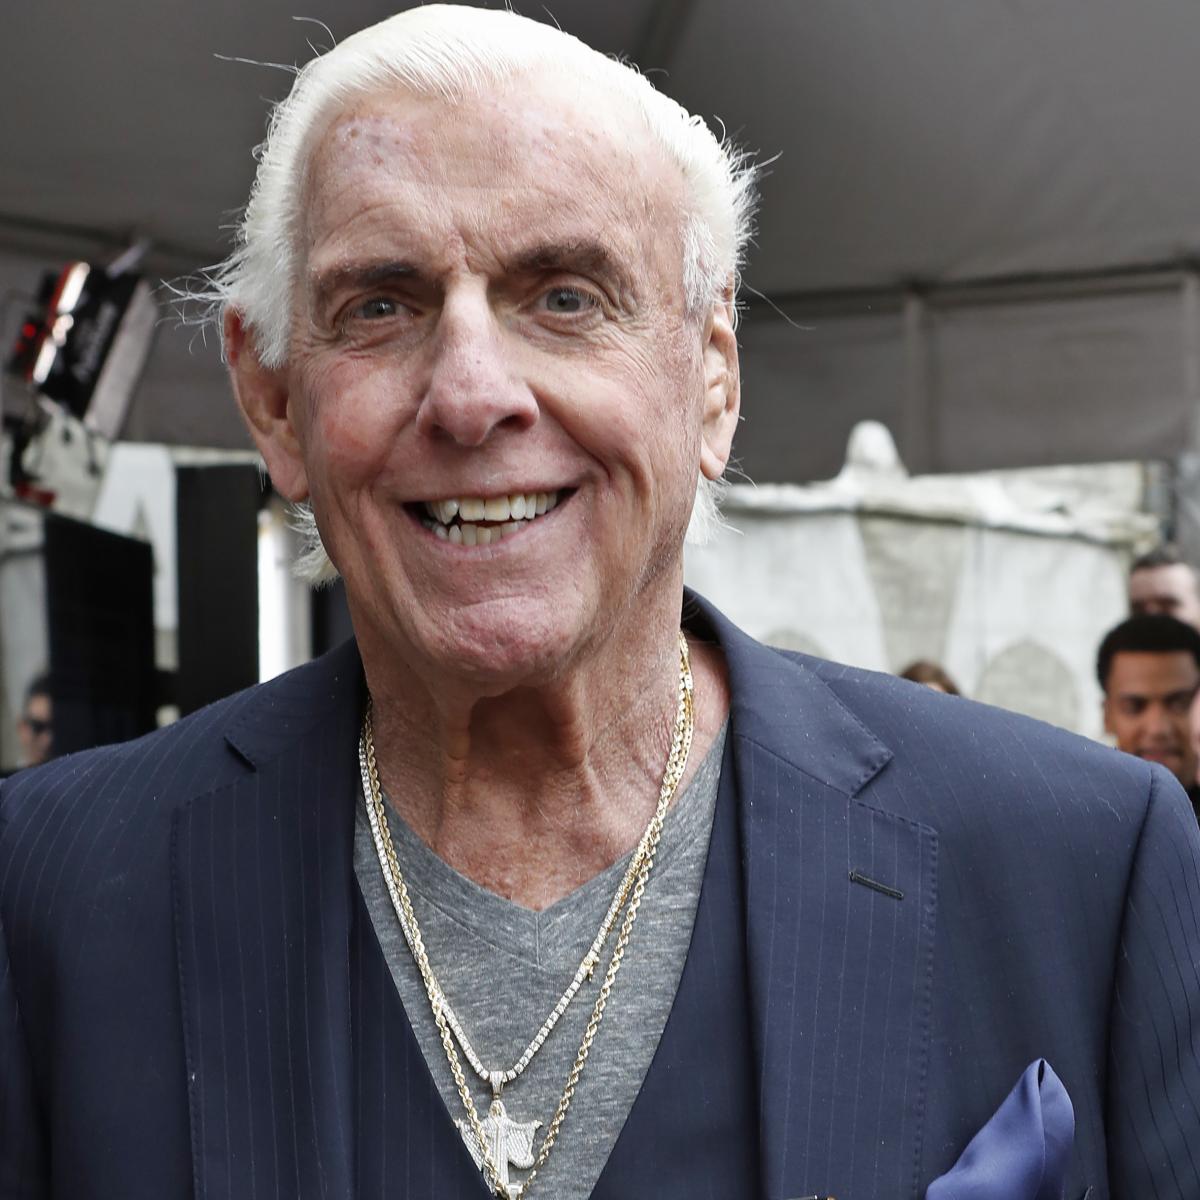 Ric Flair : What is Ric Flair Up to These Days? Inside the Ring and ...